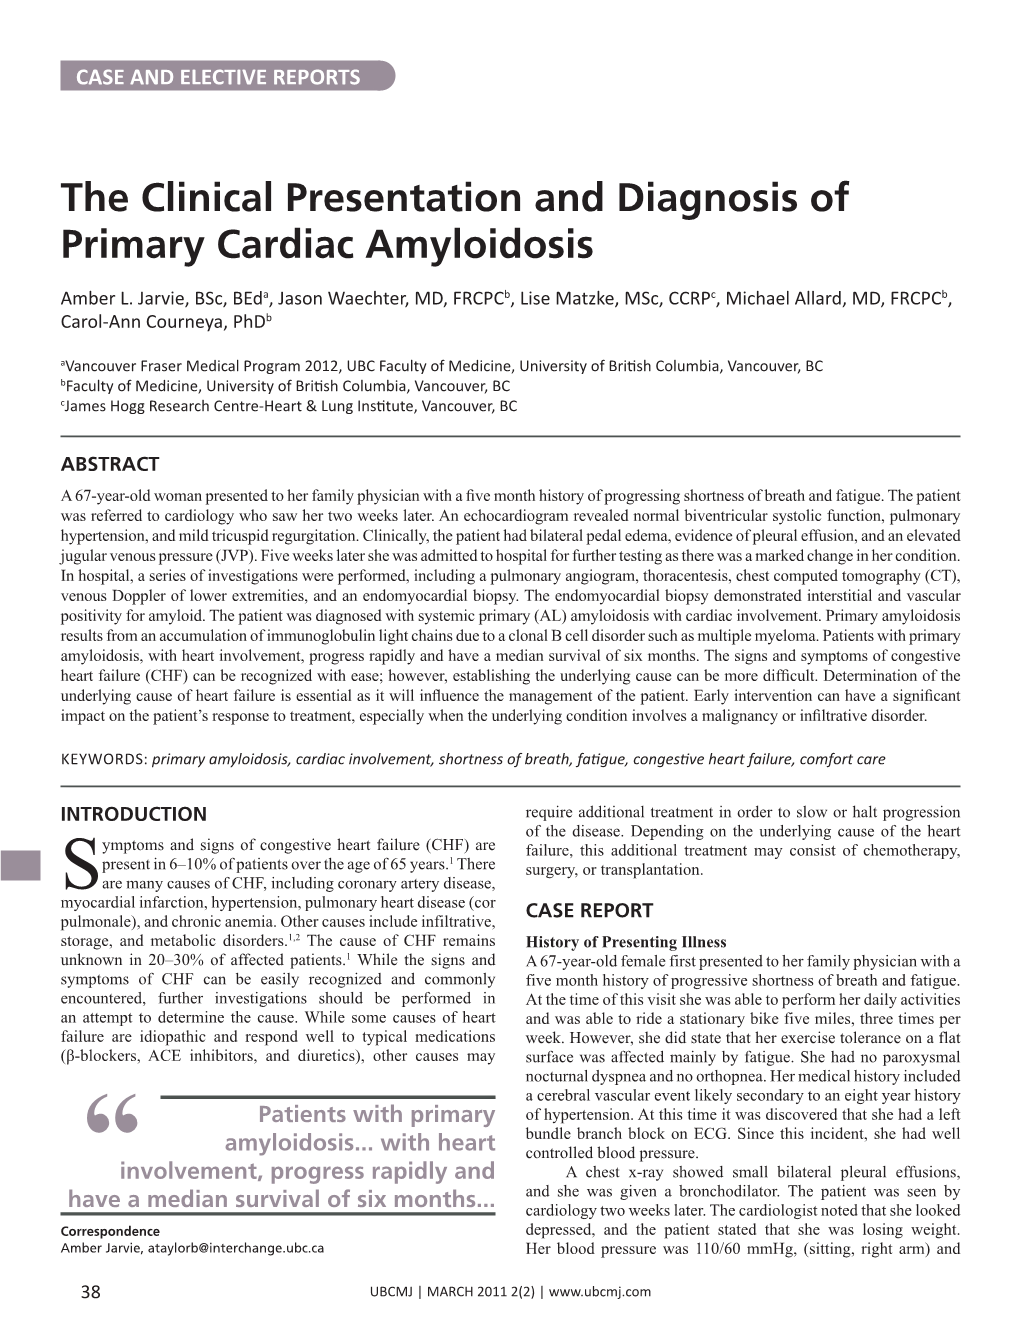 The Clinical Presentation and Diagnosis of Primary Cardiac Amyloidosis